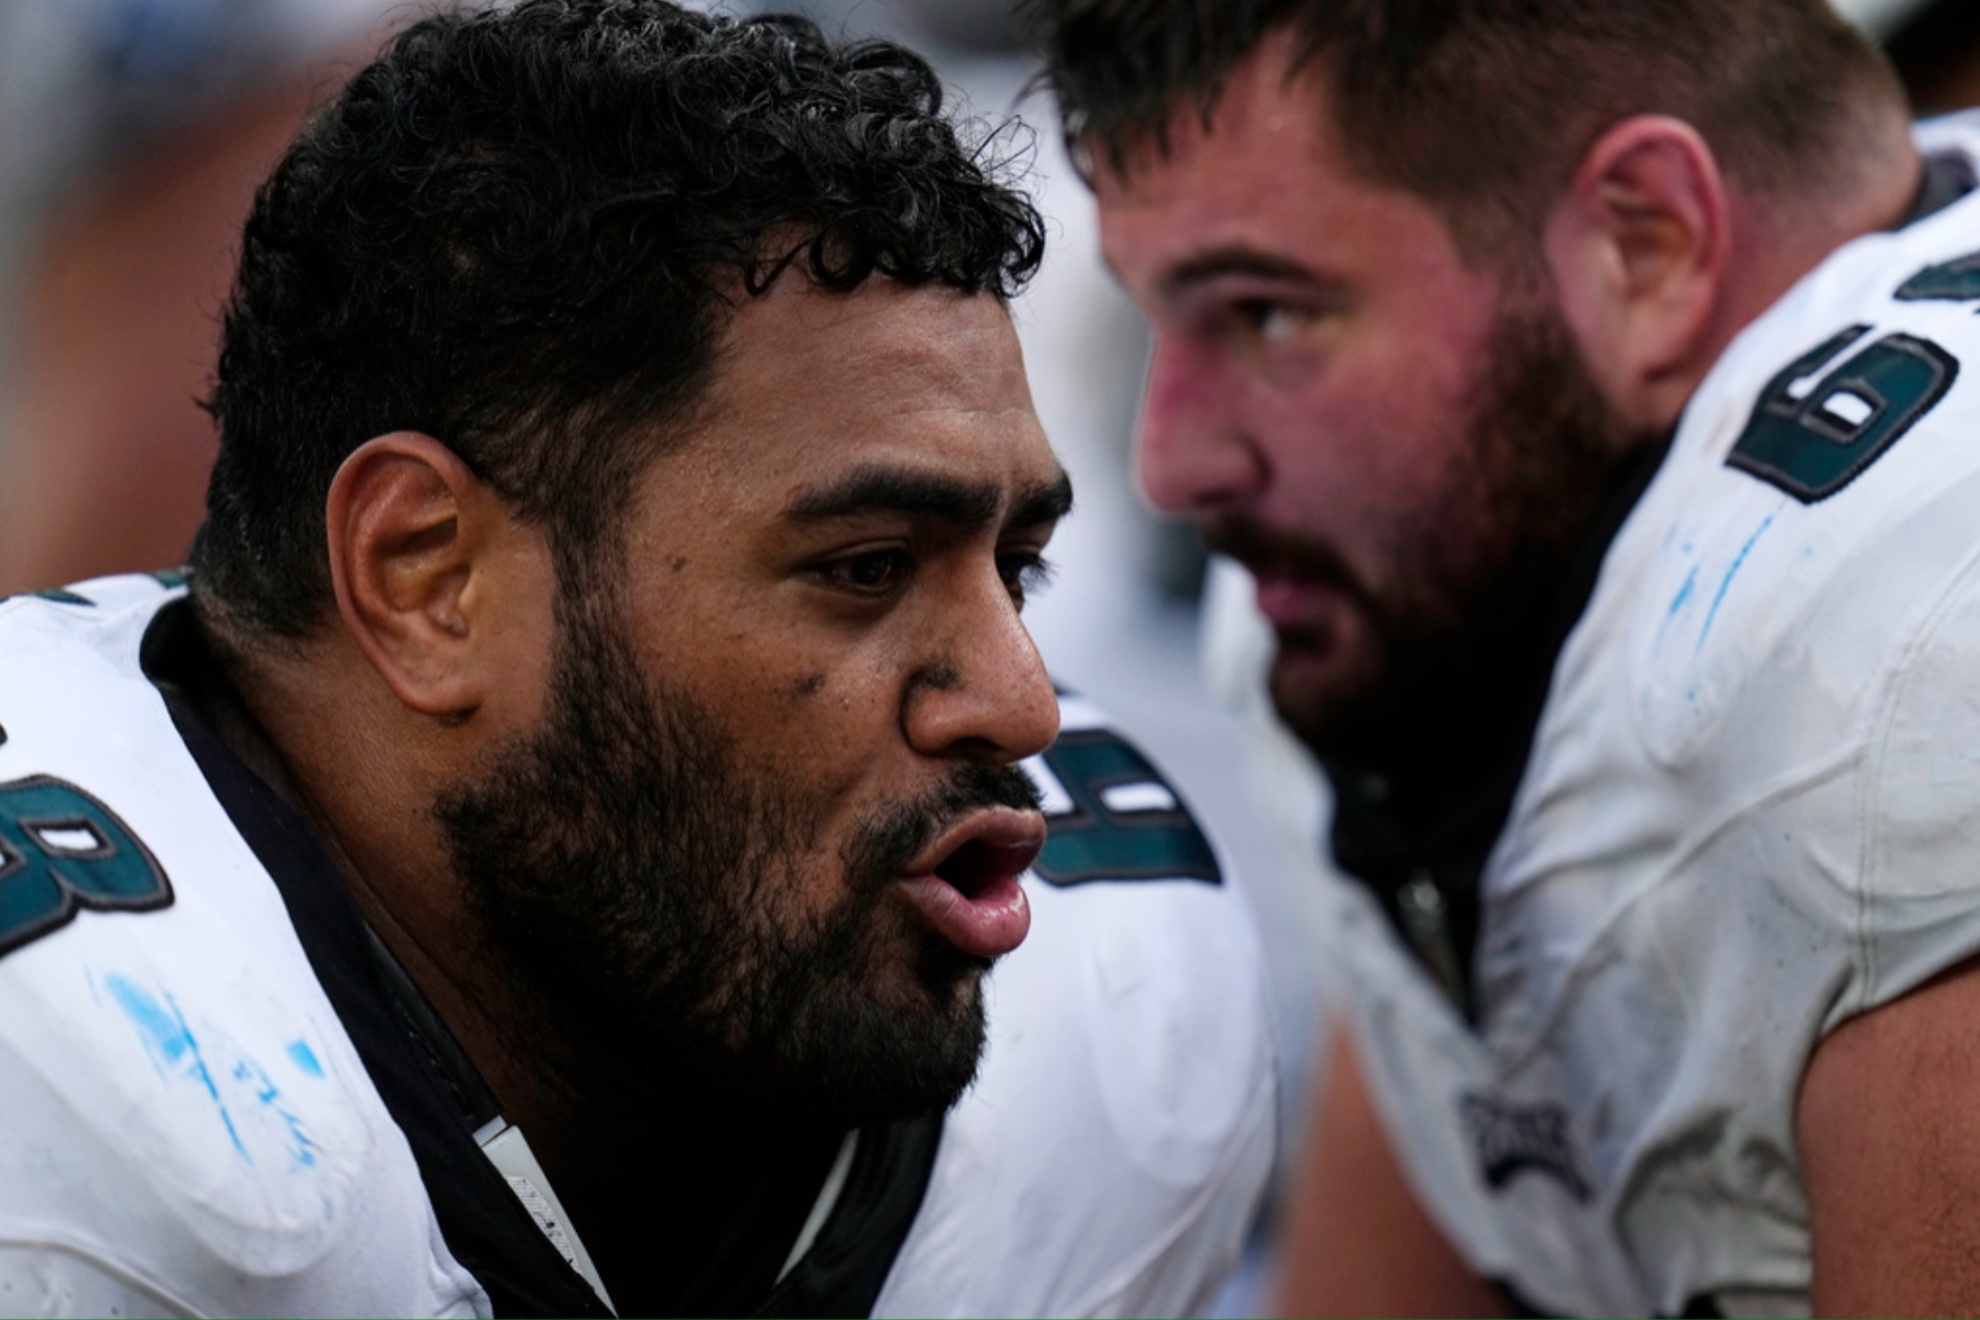 Jordan Mailata just became one of the highest-paid left tackles in the NFL